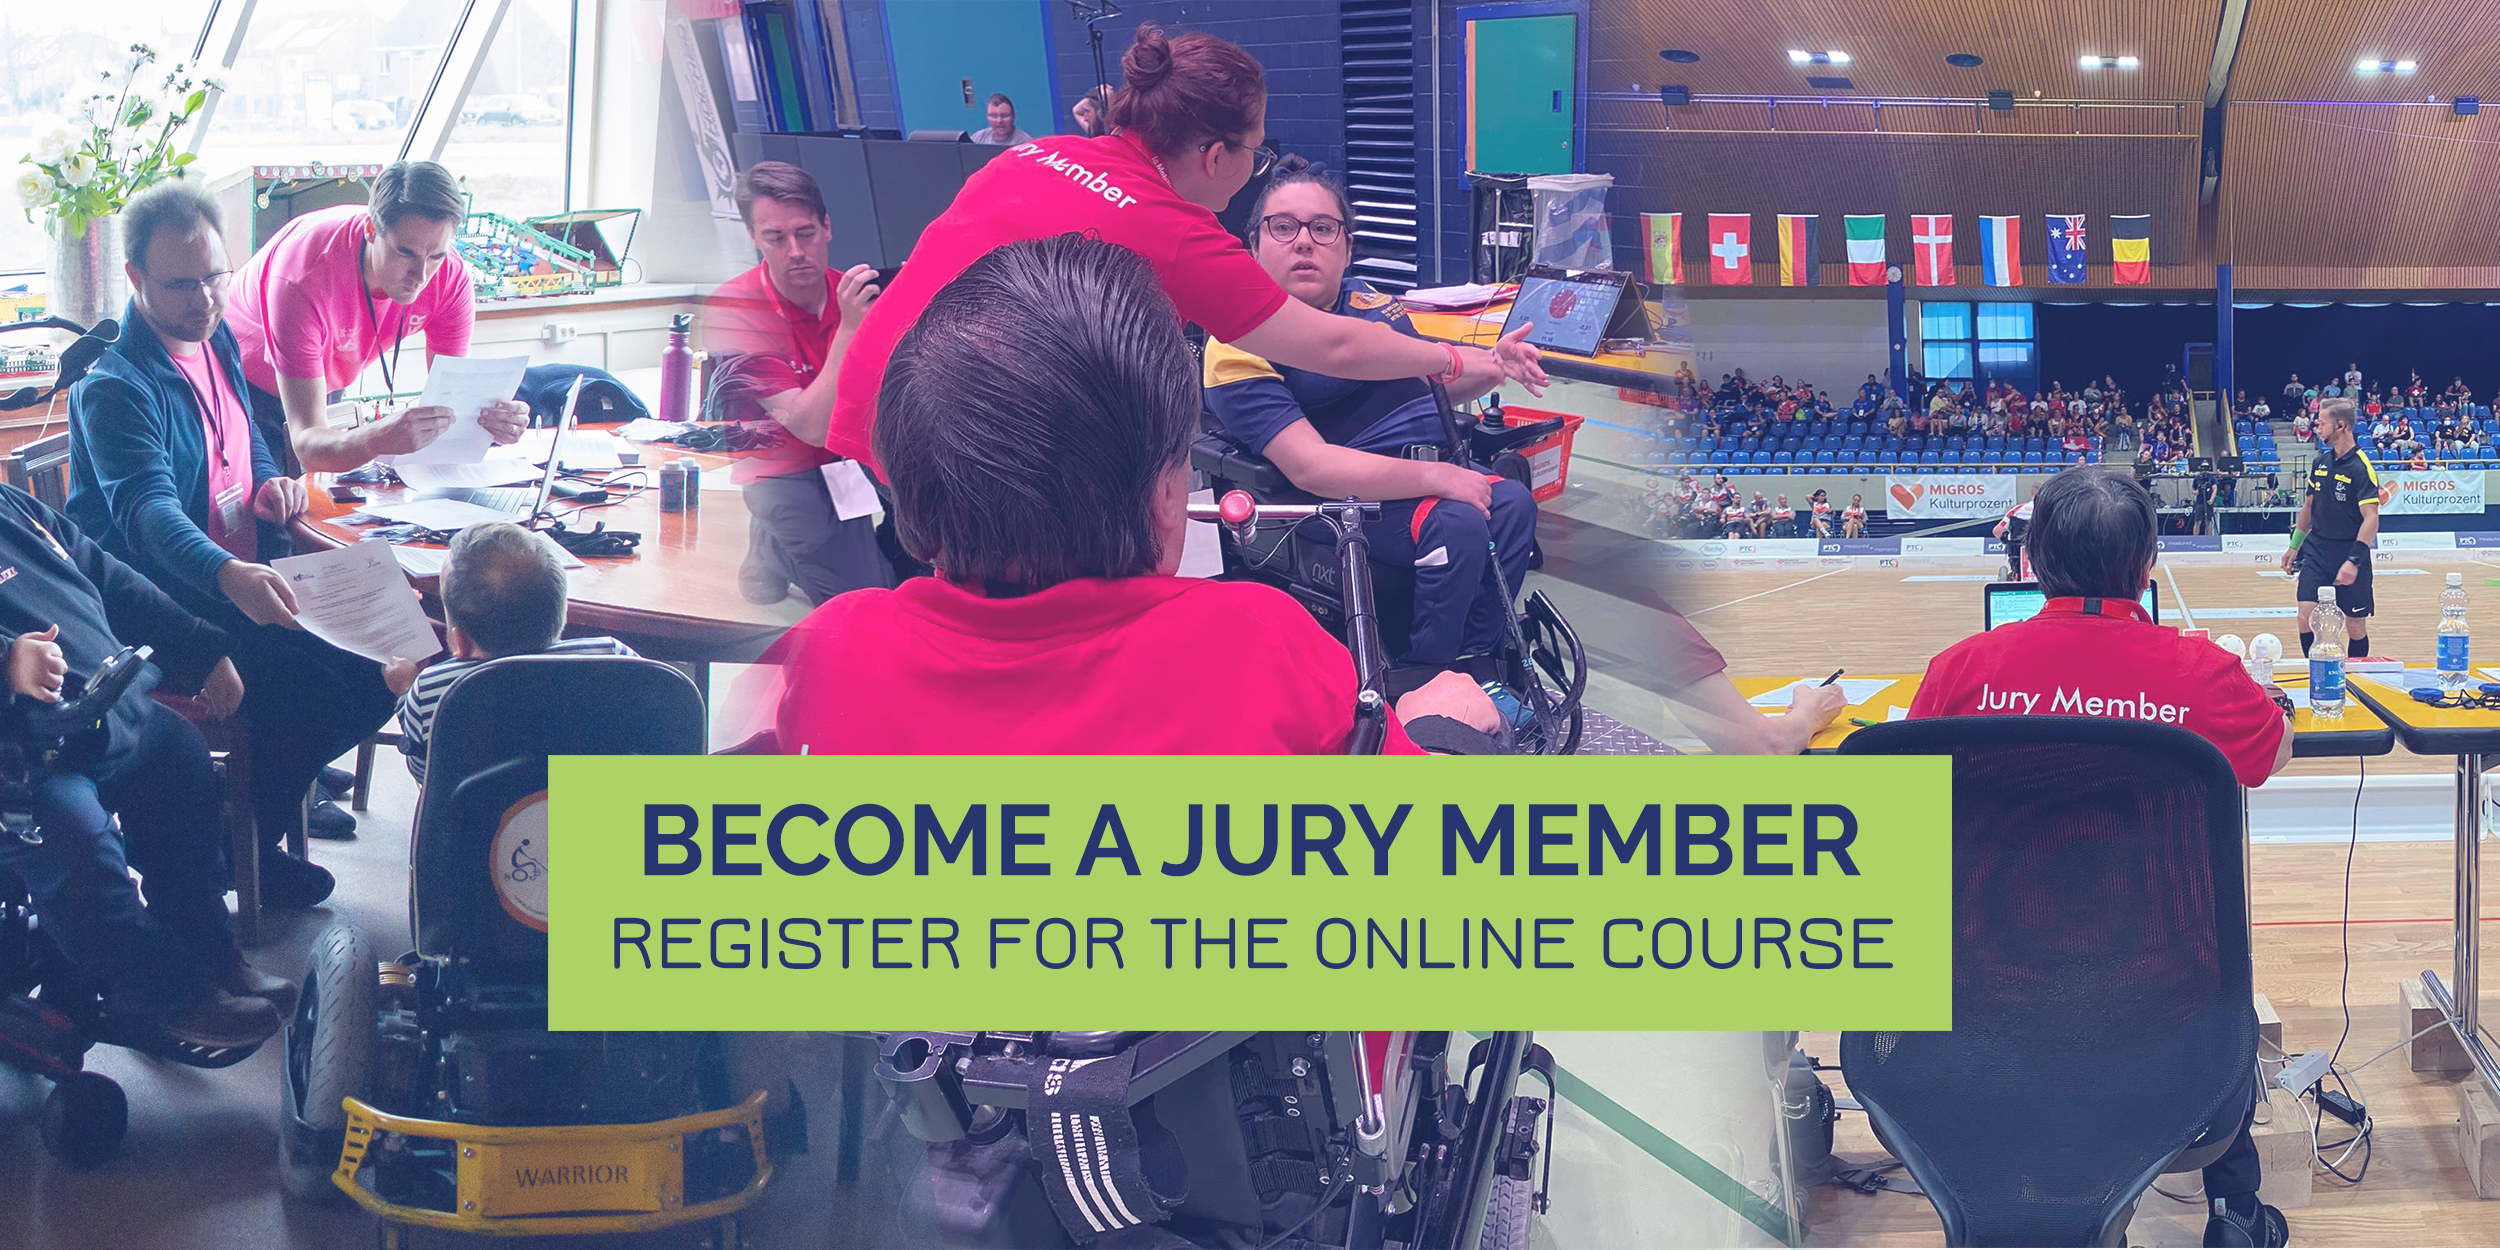 This picture shows the duties a Jury Member has and displays the text: Become a Jury Member, Register for the Online Course